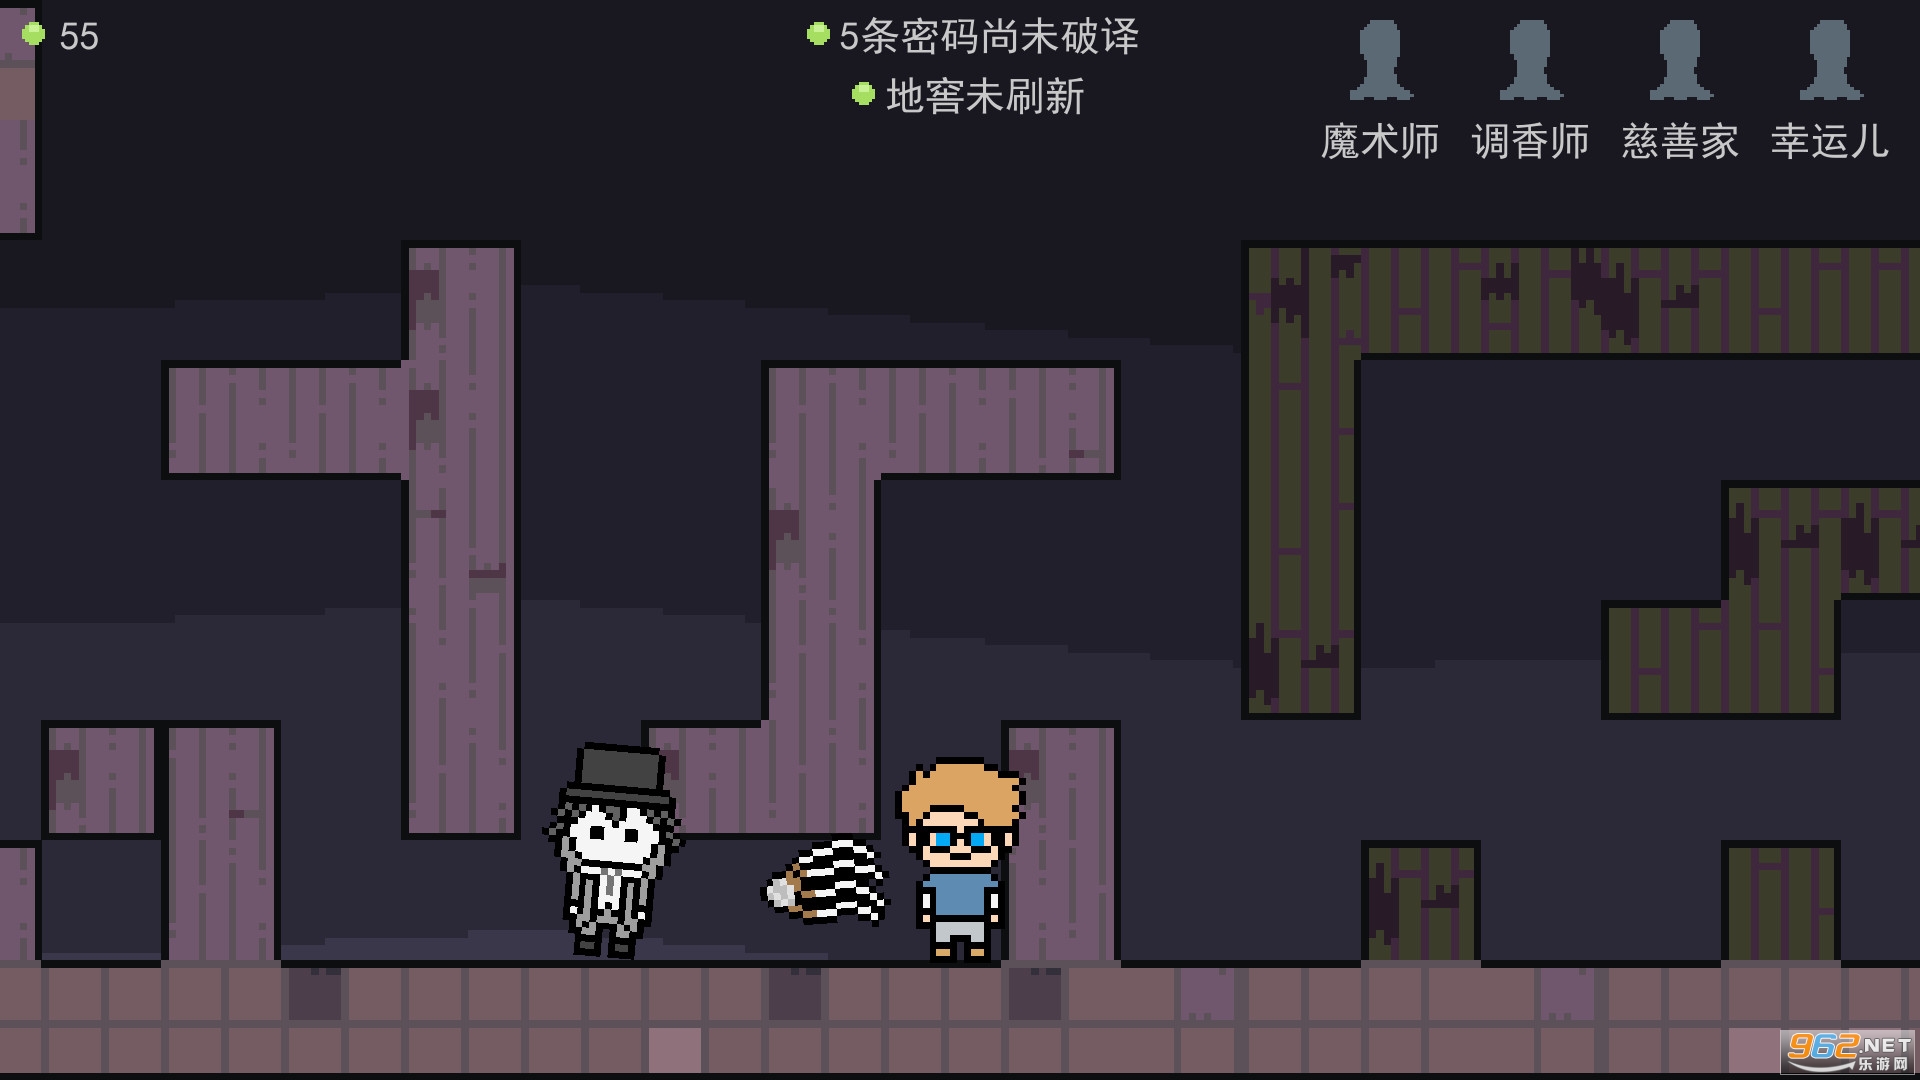  Screenshot 1 of the latest version of v1.1.6 of the fifth personality pixel version